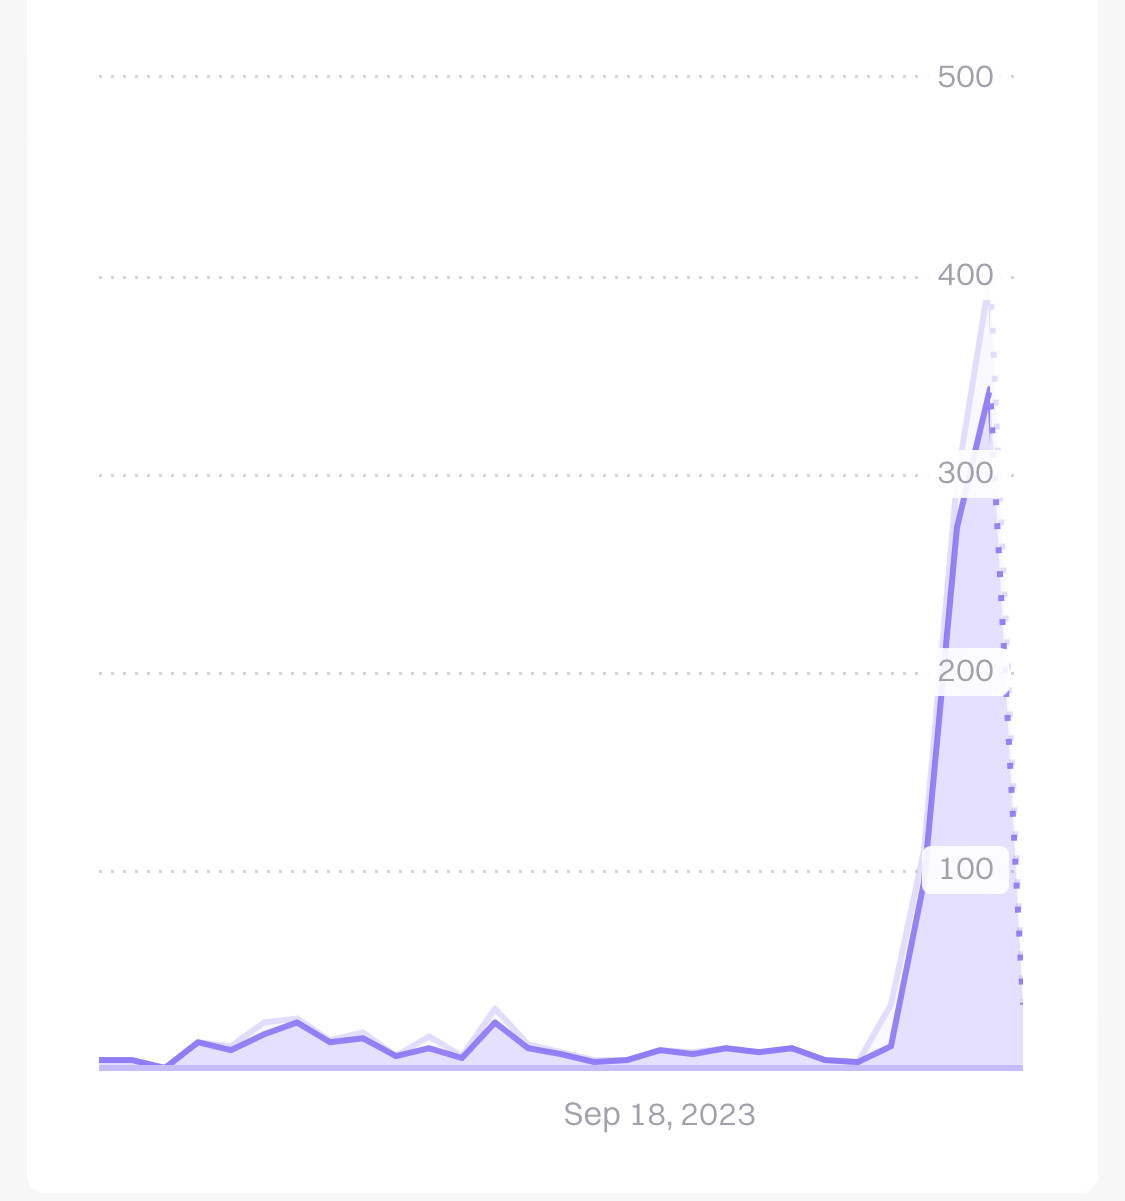 Analytics graph showing big spike in visits in the last few days